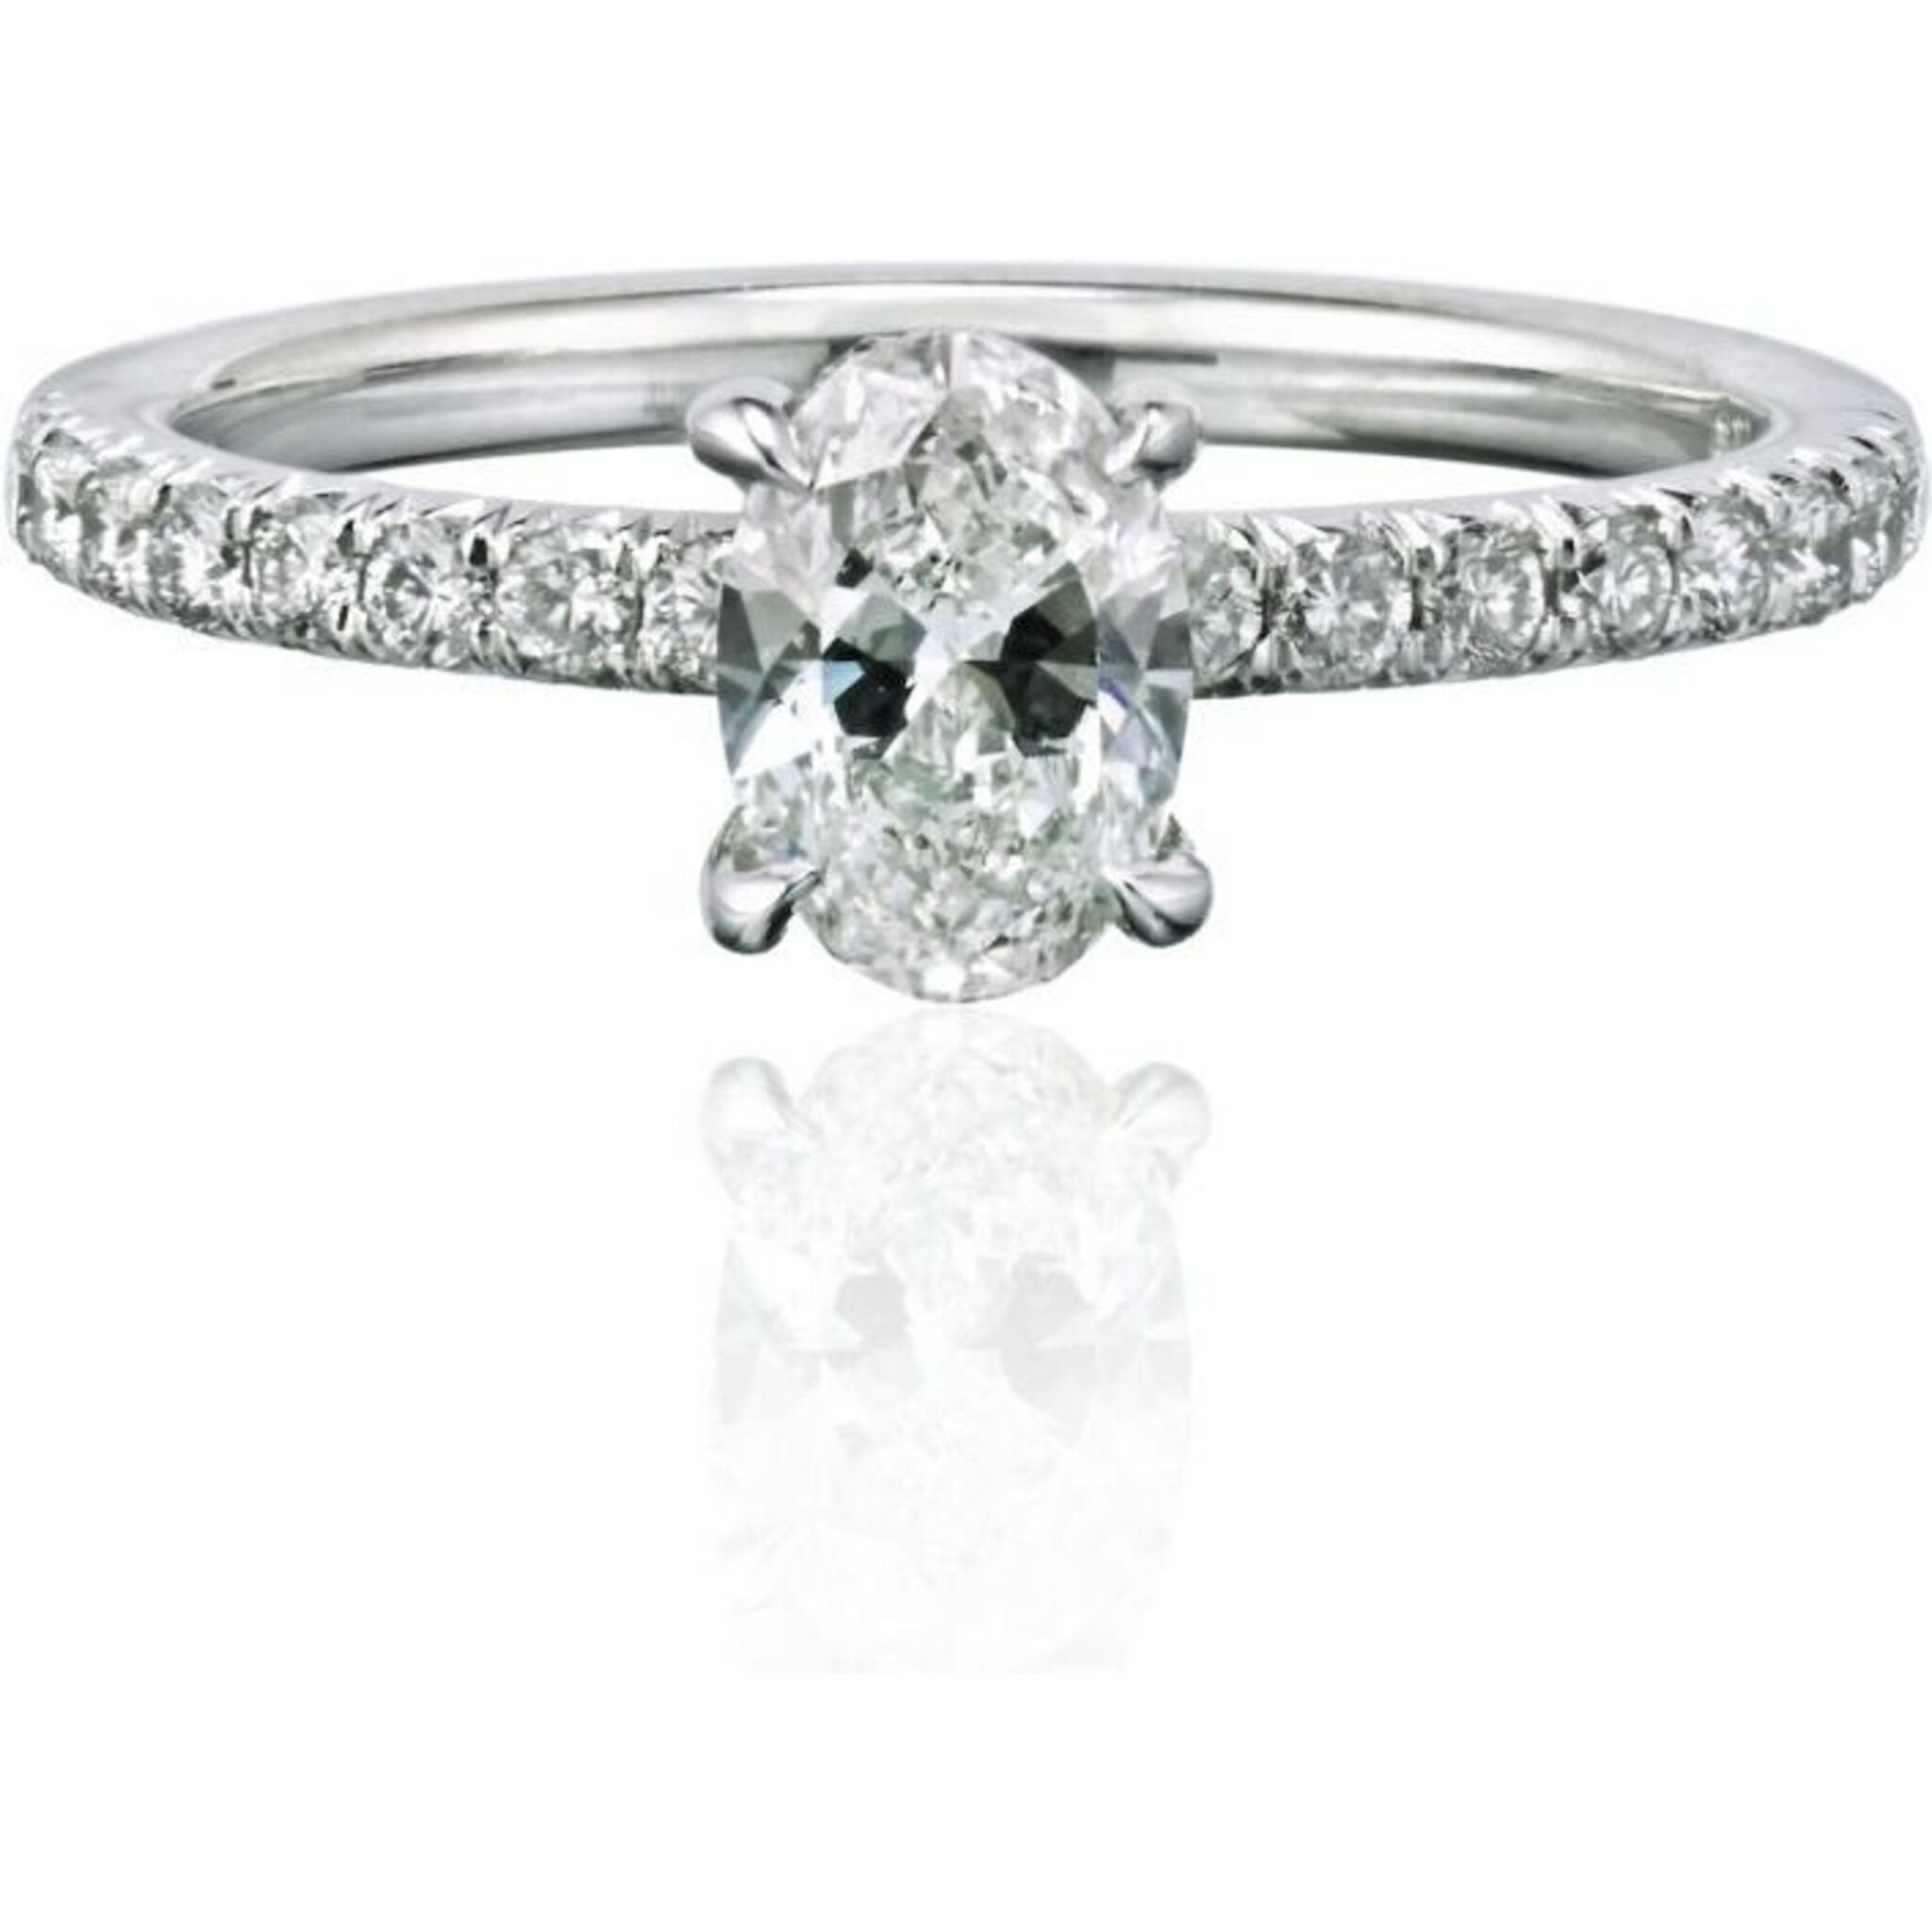 0.72 Carat Oval Diamond G/SI1 GIA Engagement Ring